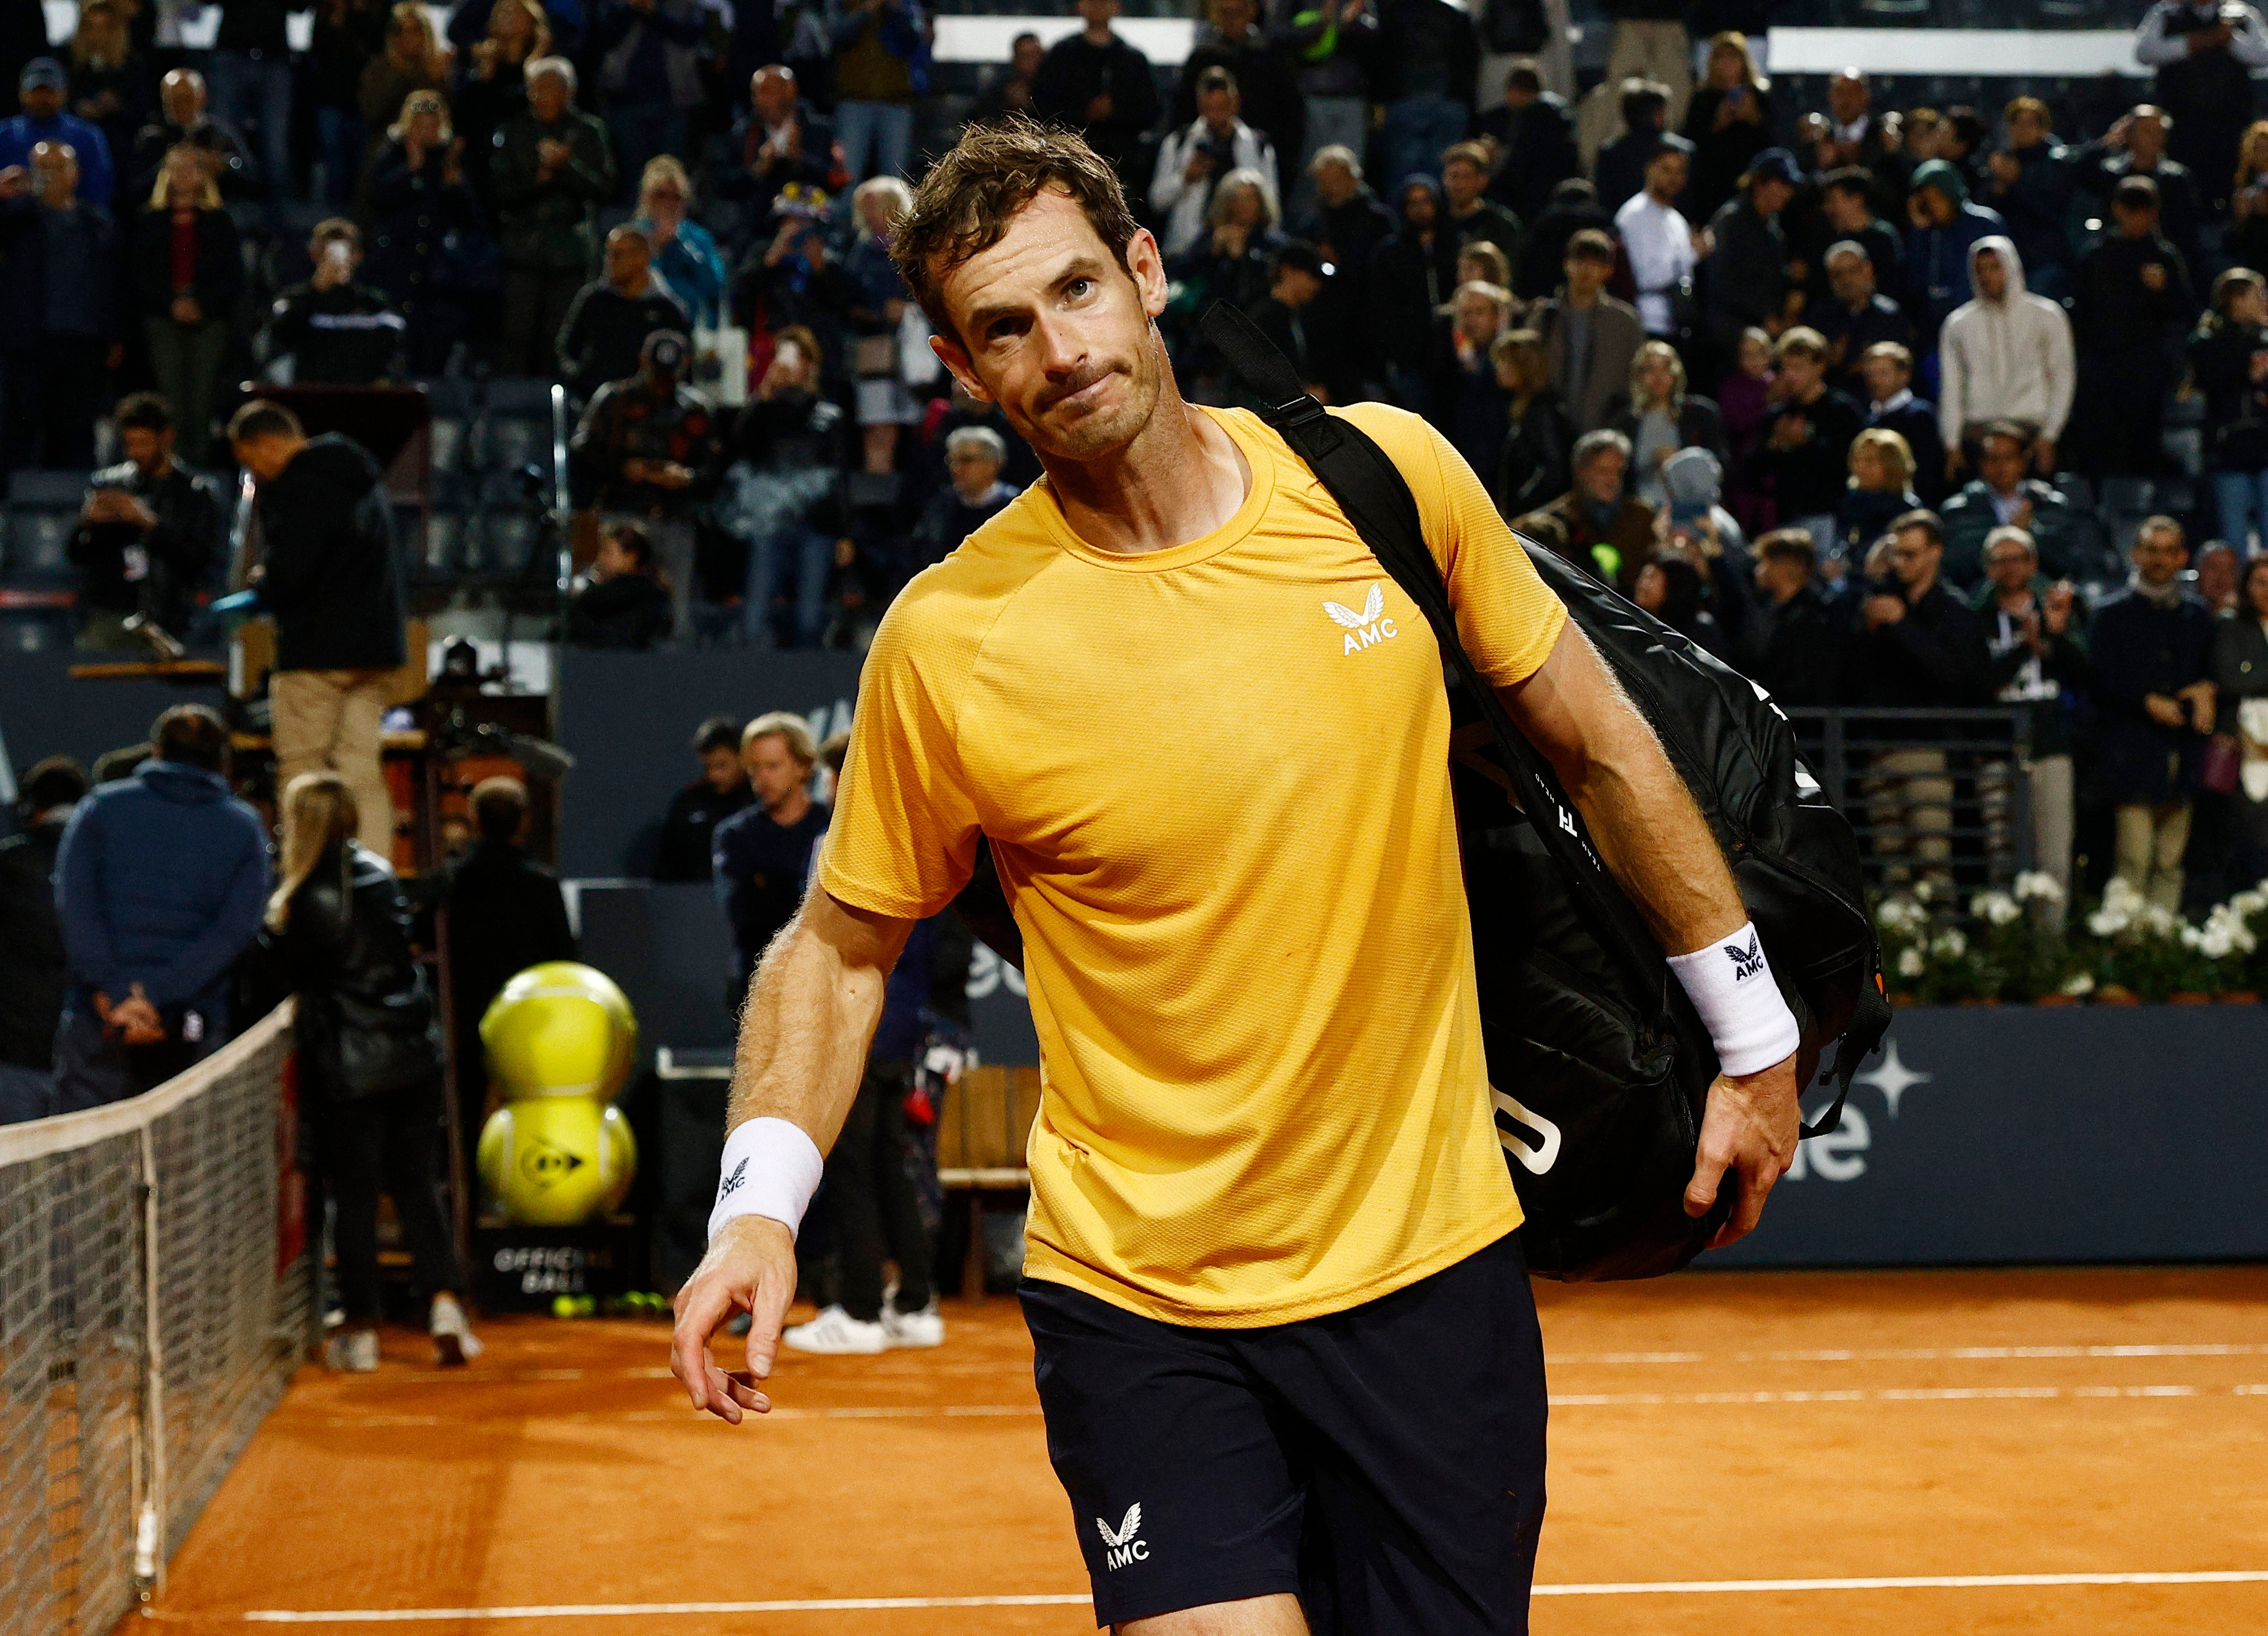 Andy Murray suffered disappointment in Rome